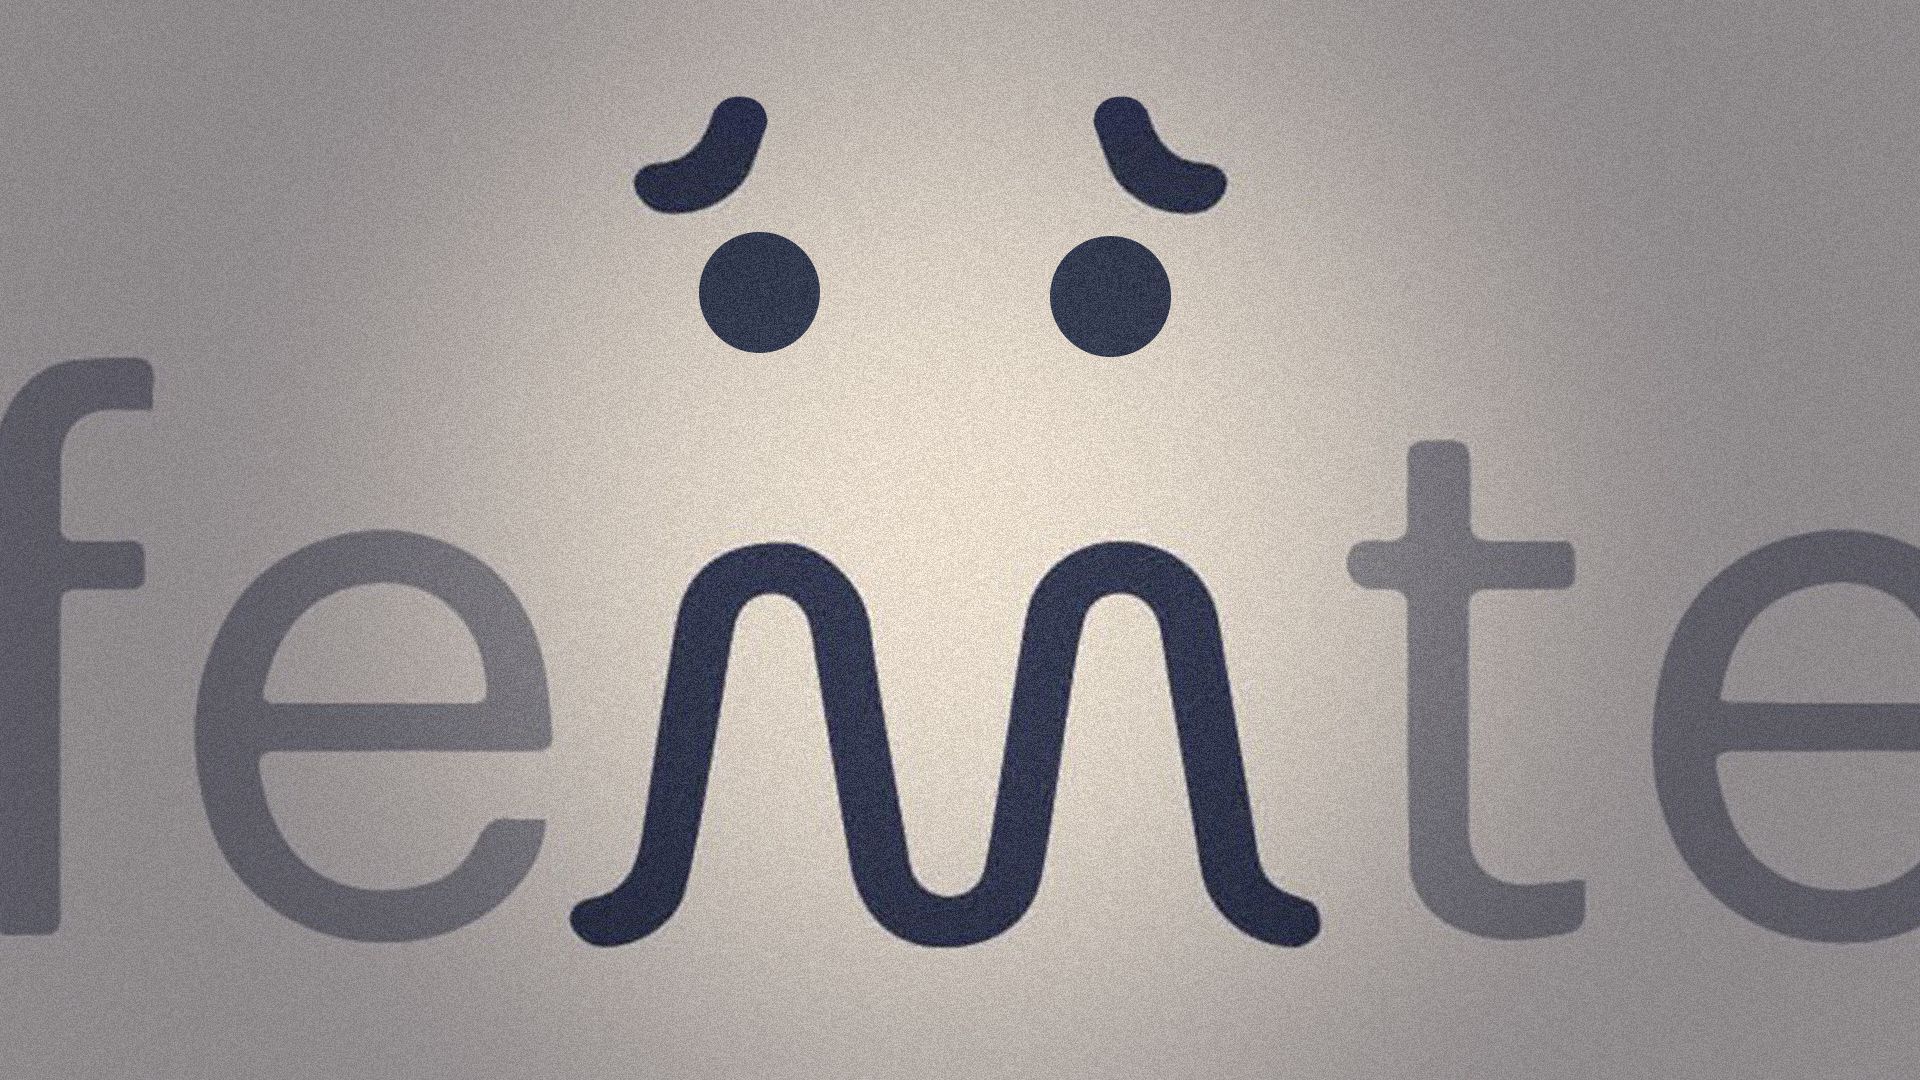 Illustration of the Femtec Health logo forming an anxious face.